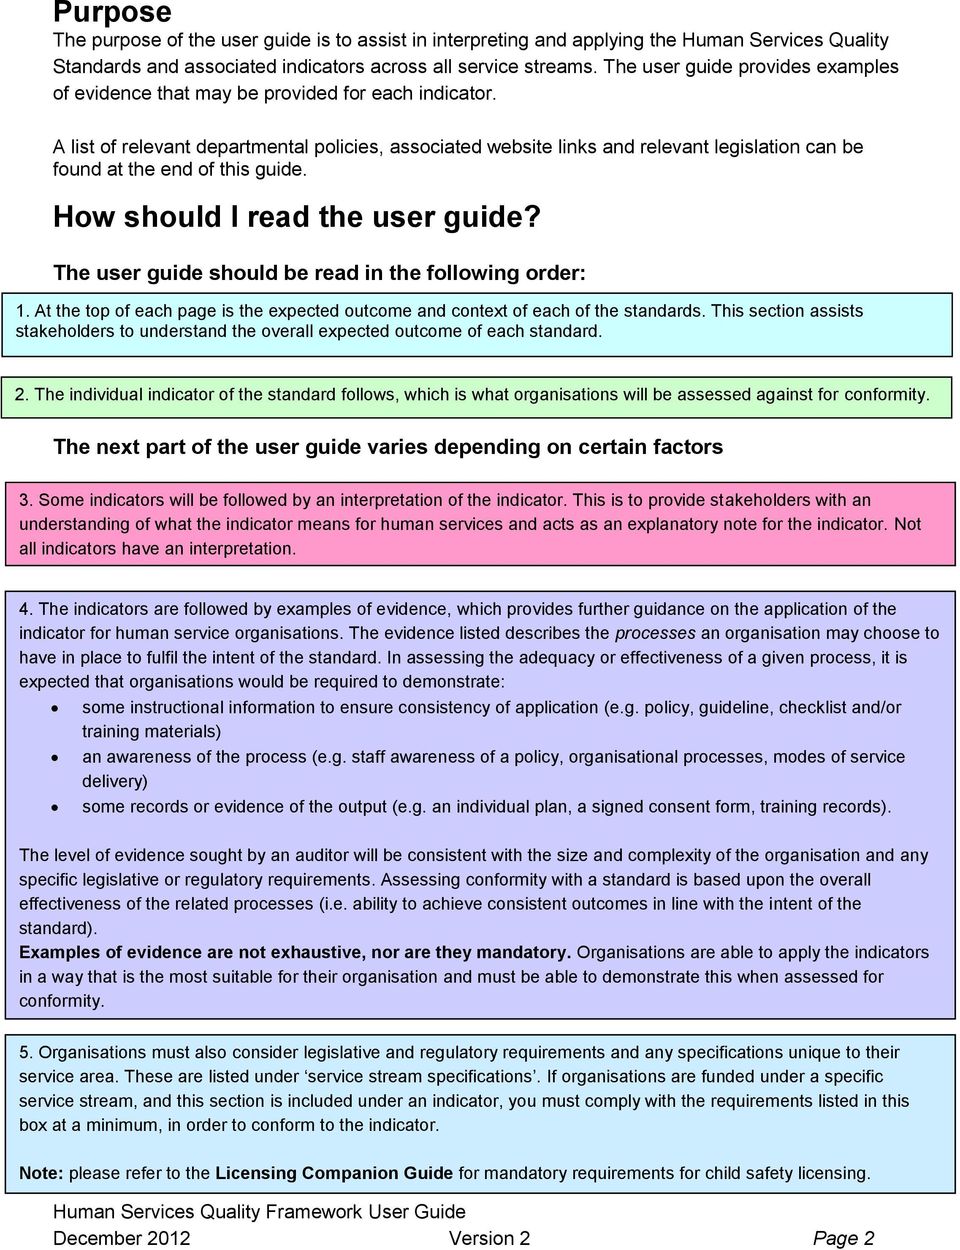 A list of relevant departmental policies, associated website links and relevant legislation can be found at the end of this guide. How should I read the user guide?